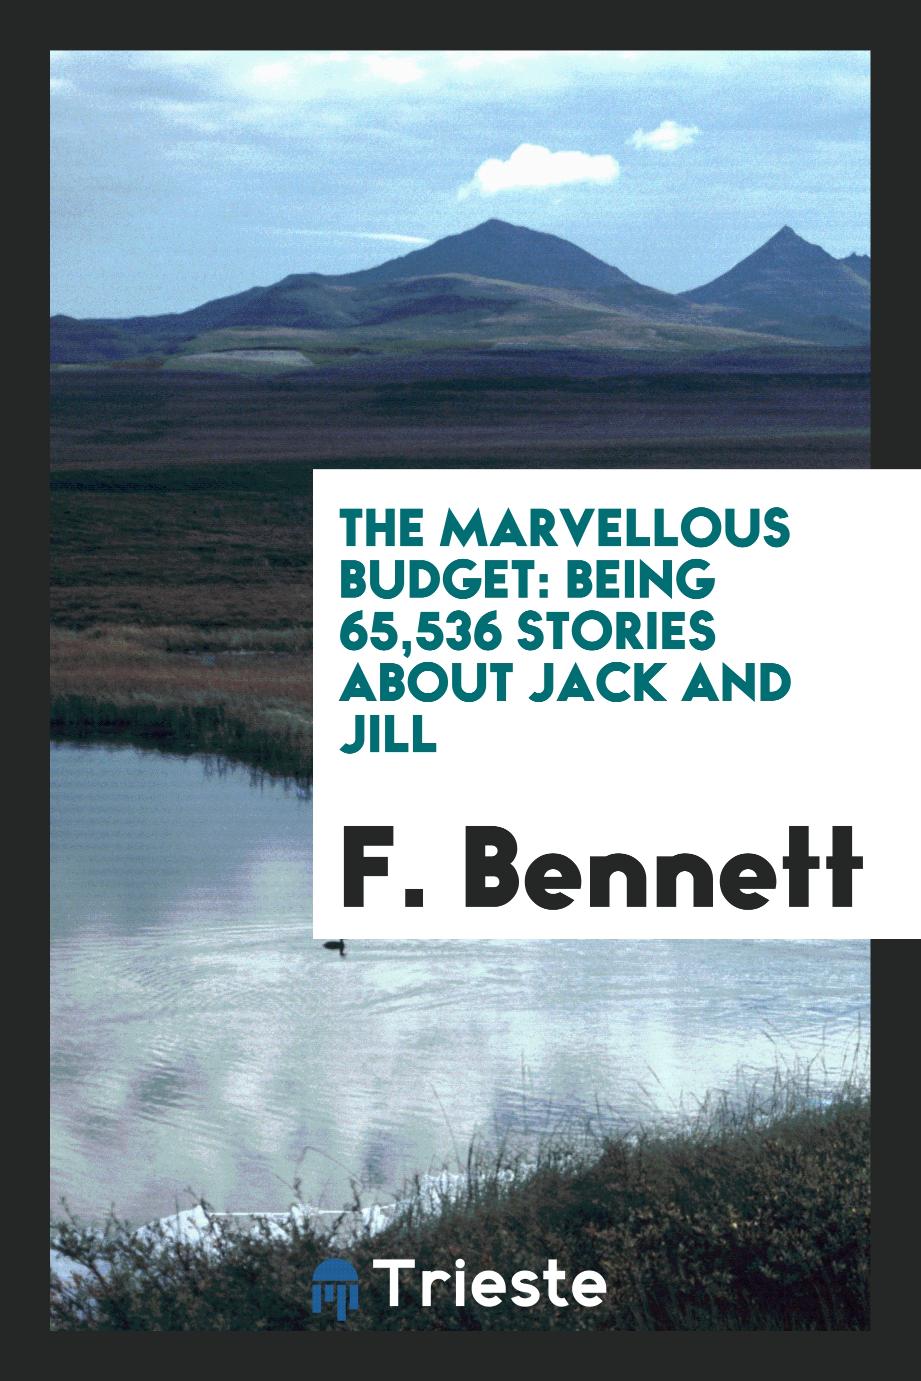 The marvellous budget: being 65,536 stories about Jack and Jill